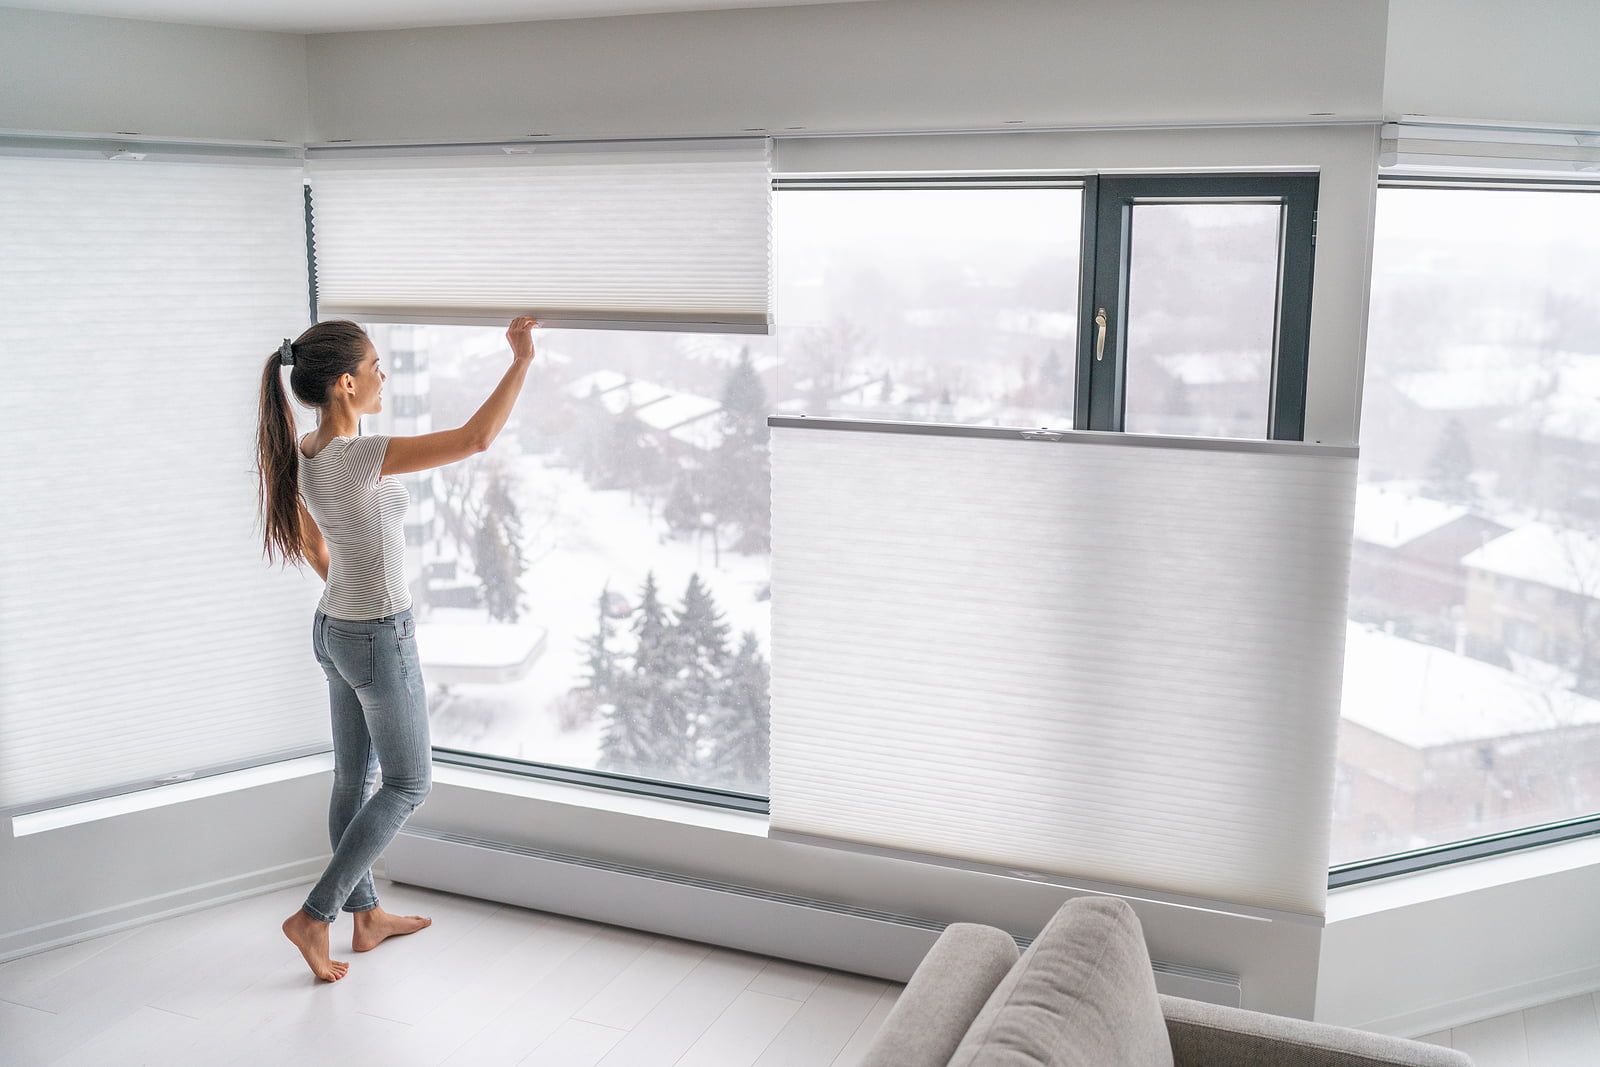 Woman opening honeycomb blinds